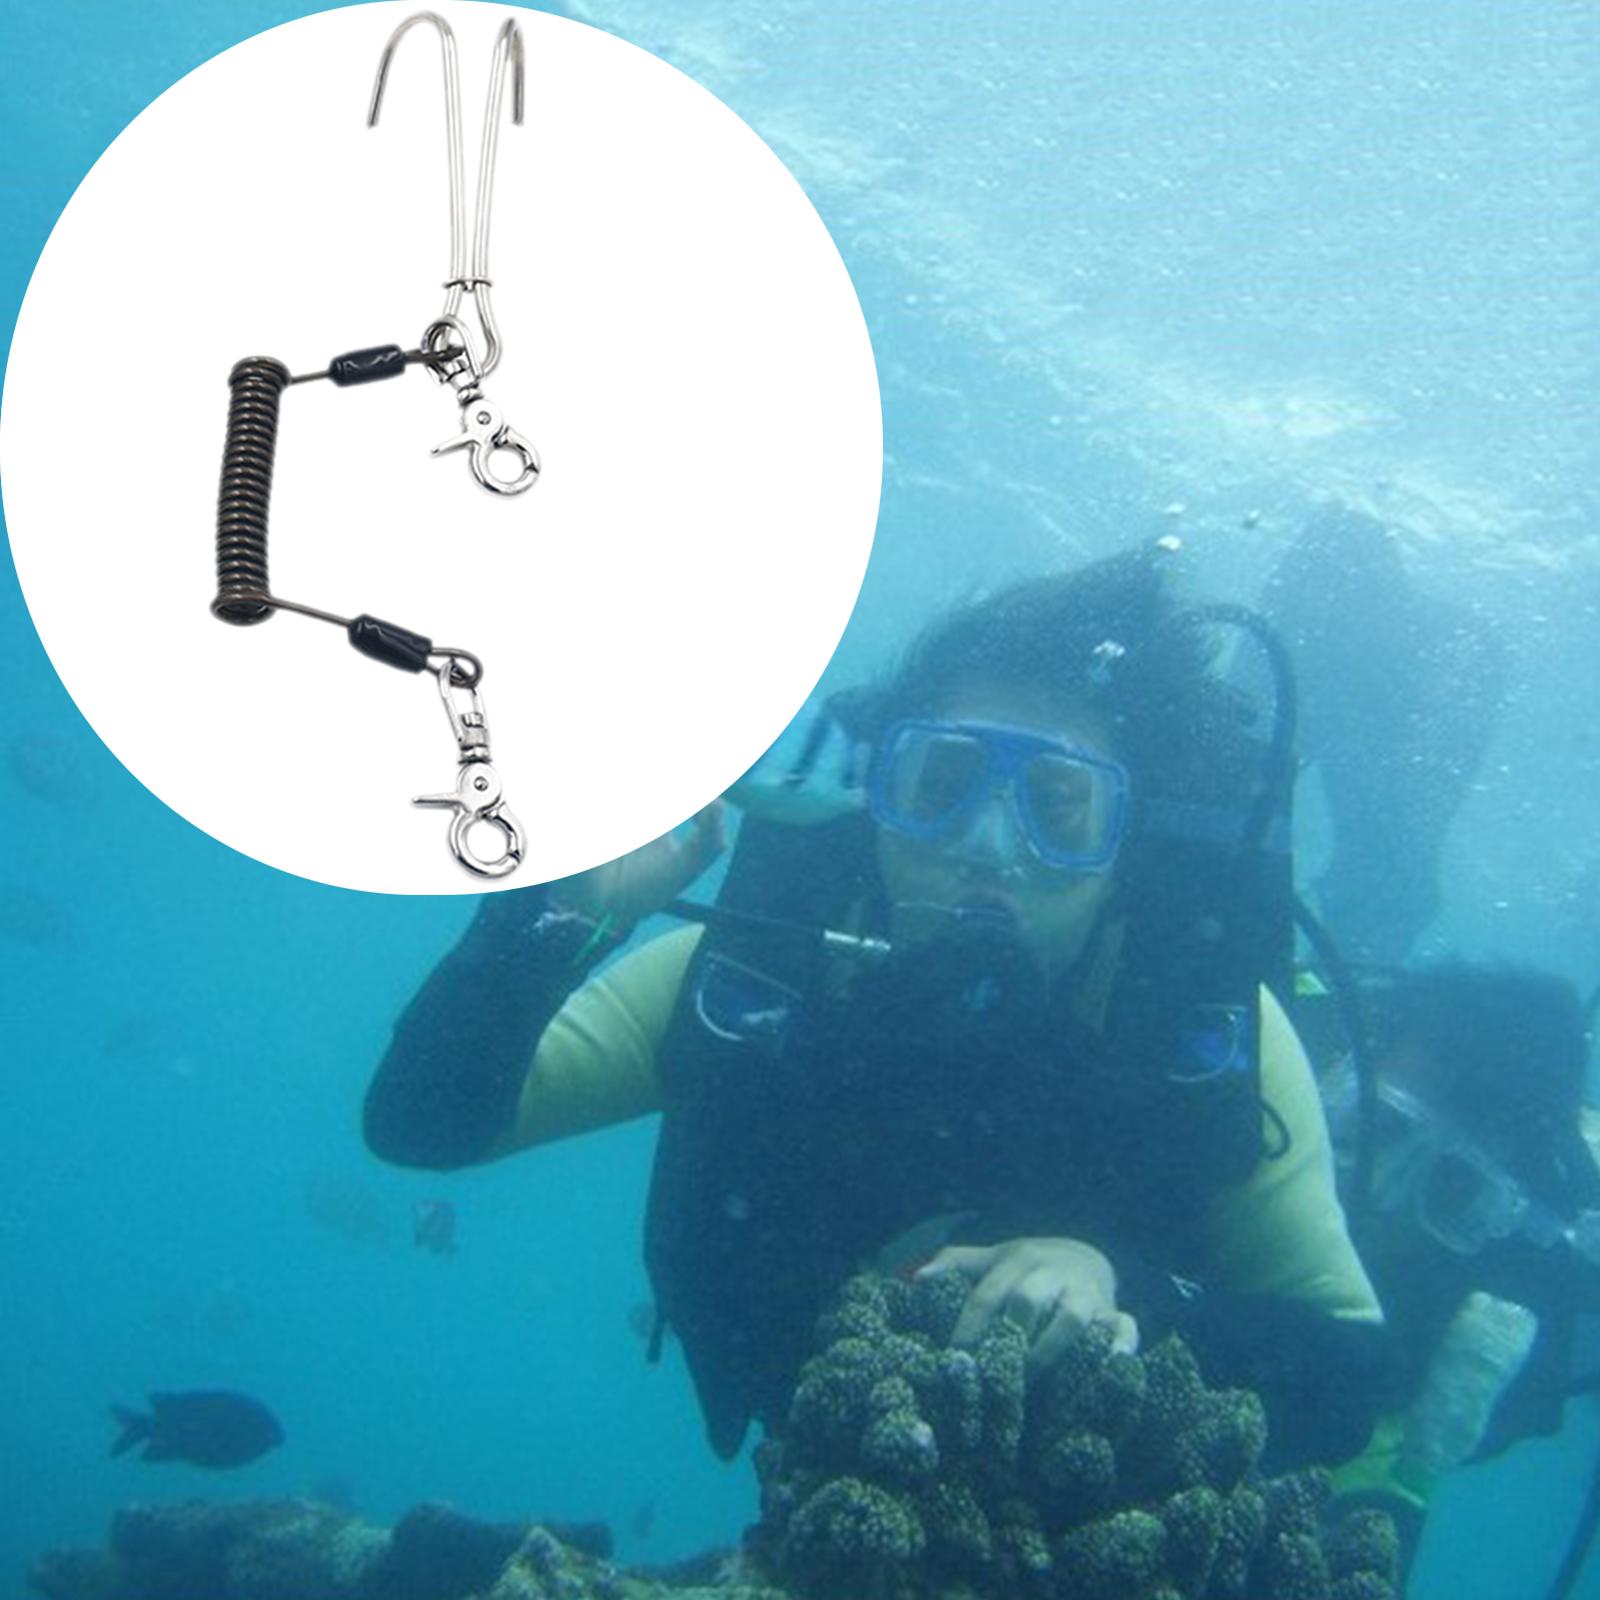 Dual Hook Reef  Hook Scuba Diving with Spiral Coil Lanyard Quick-Release Safety Accessories